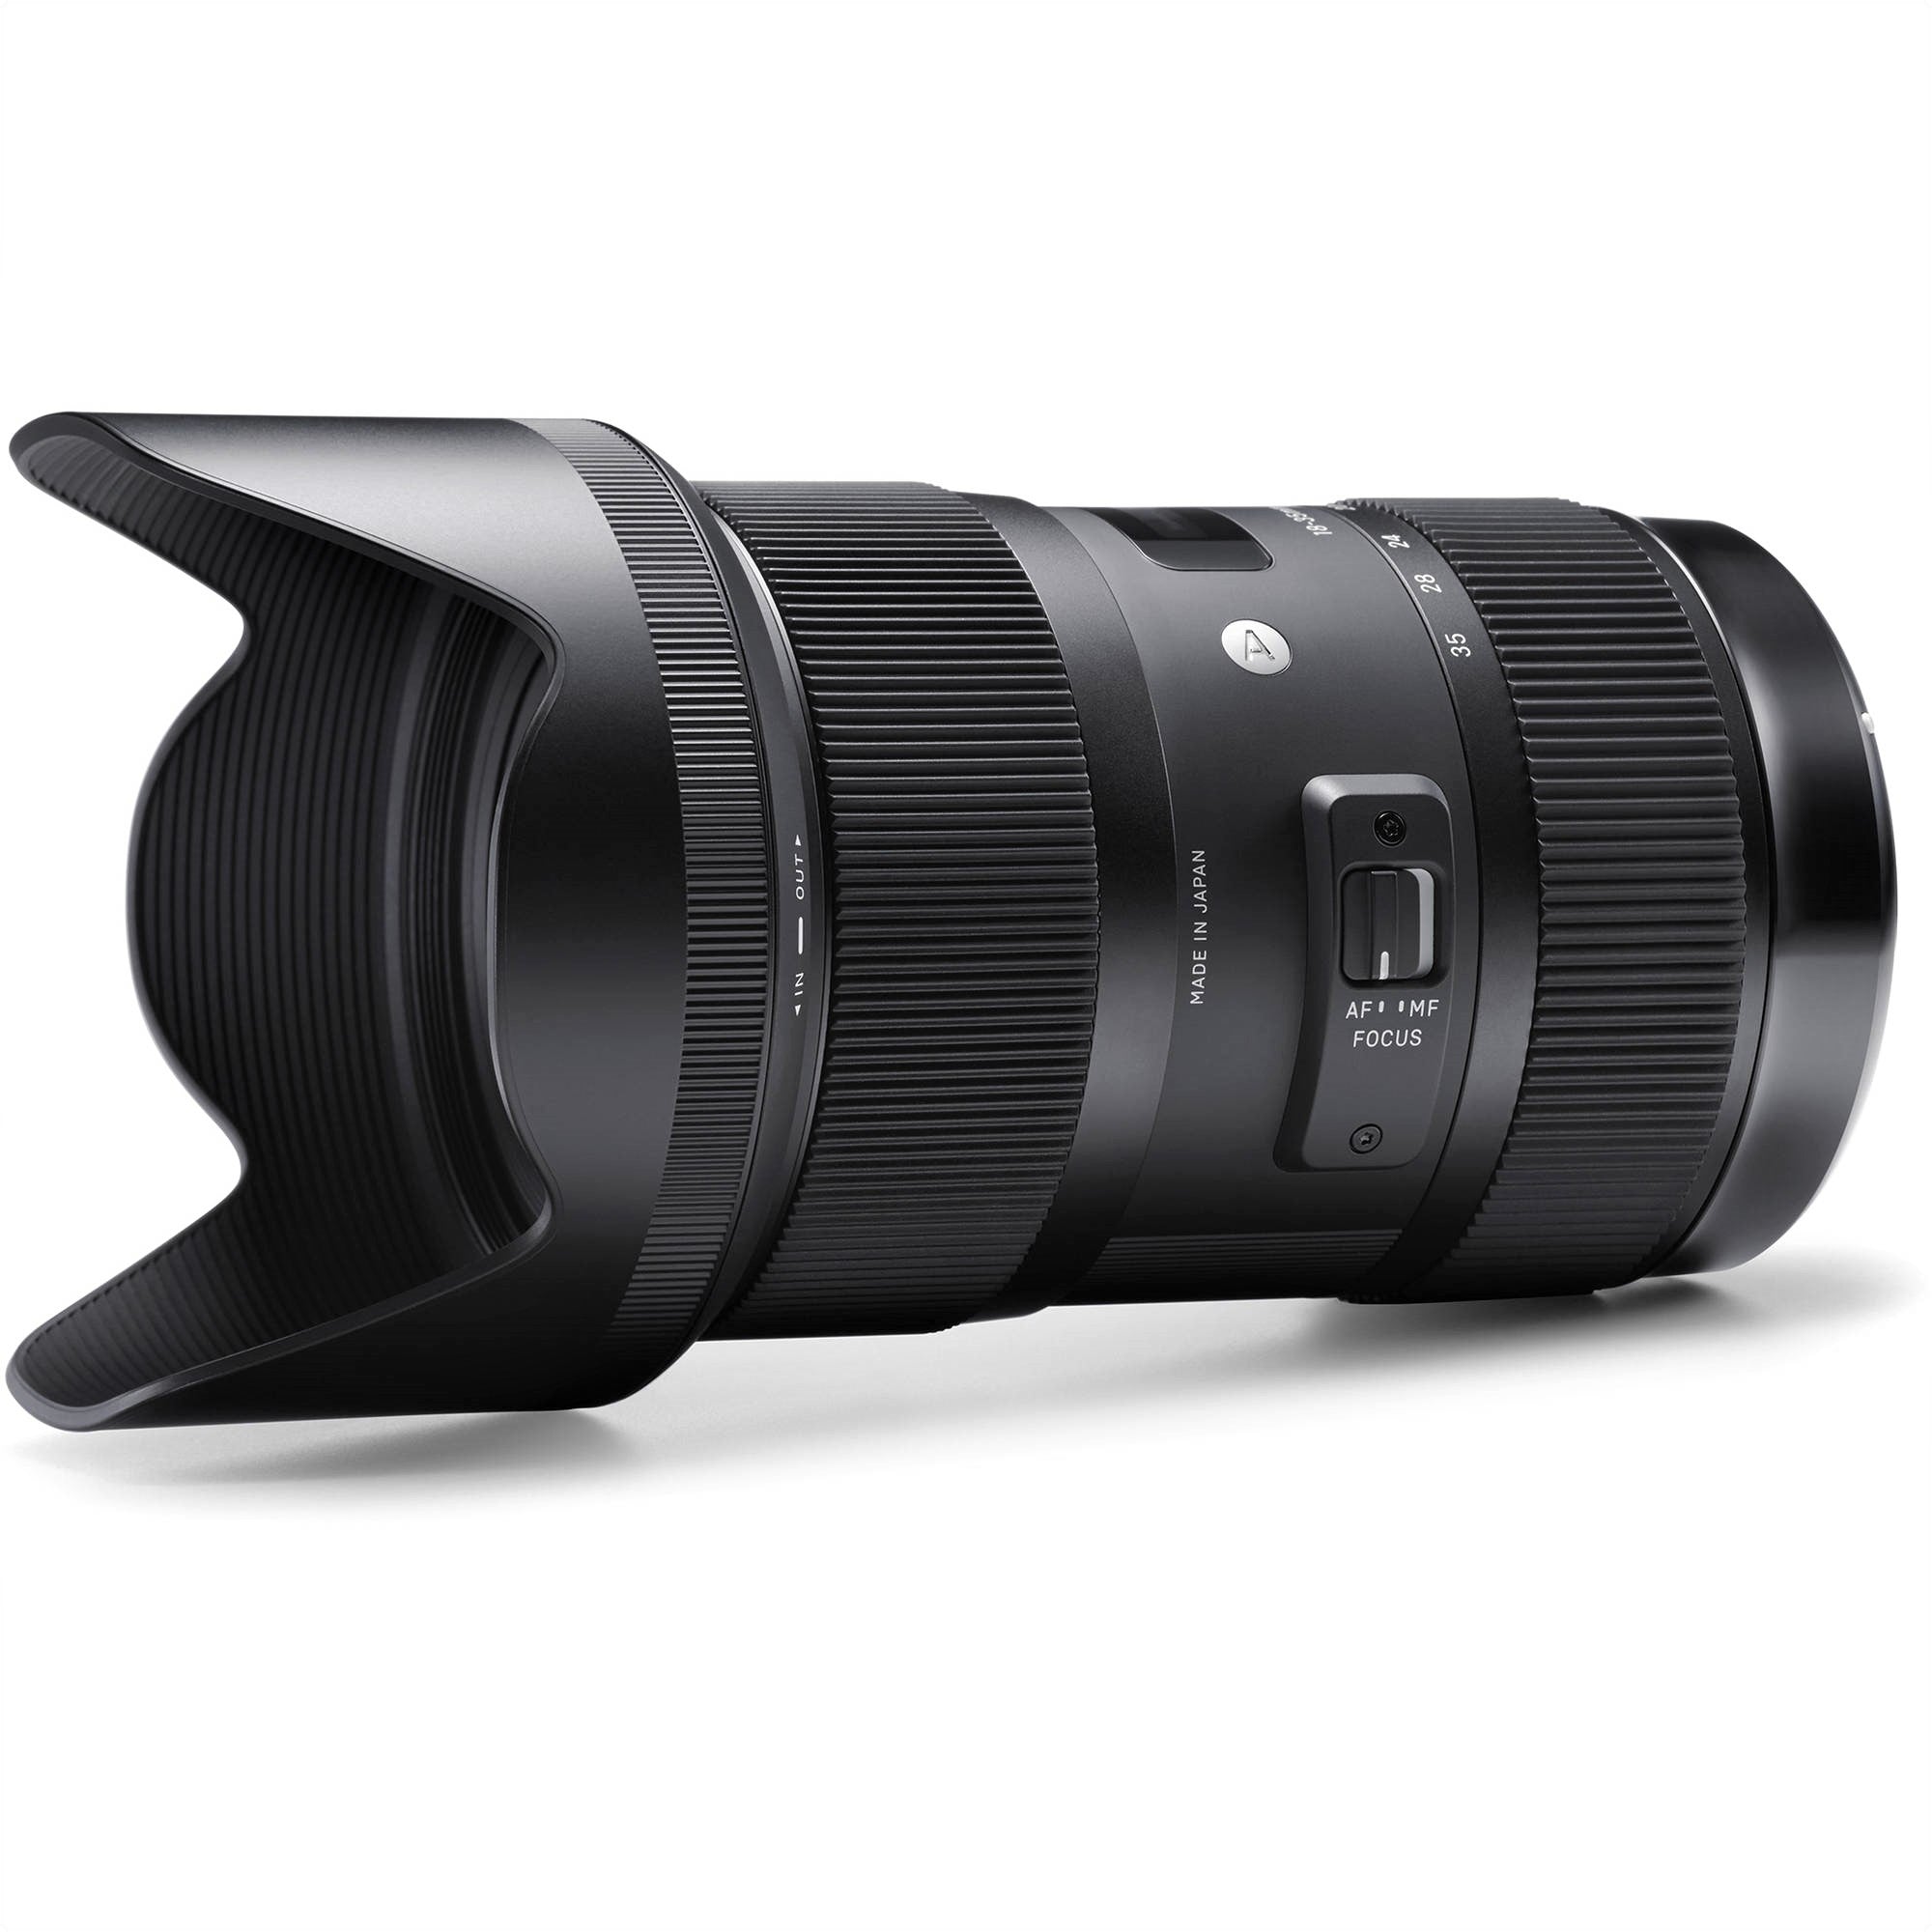 Sigma 18-35mm F1.8 DC HSM Art Lens for Canon EF in a Side View